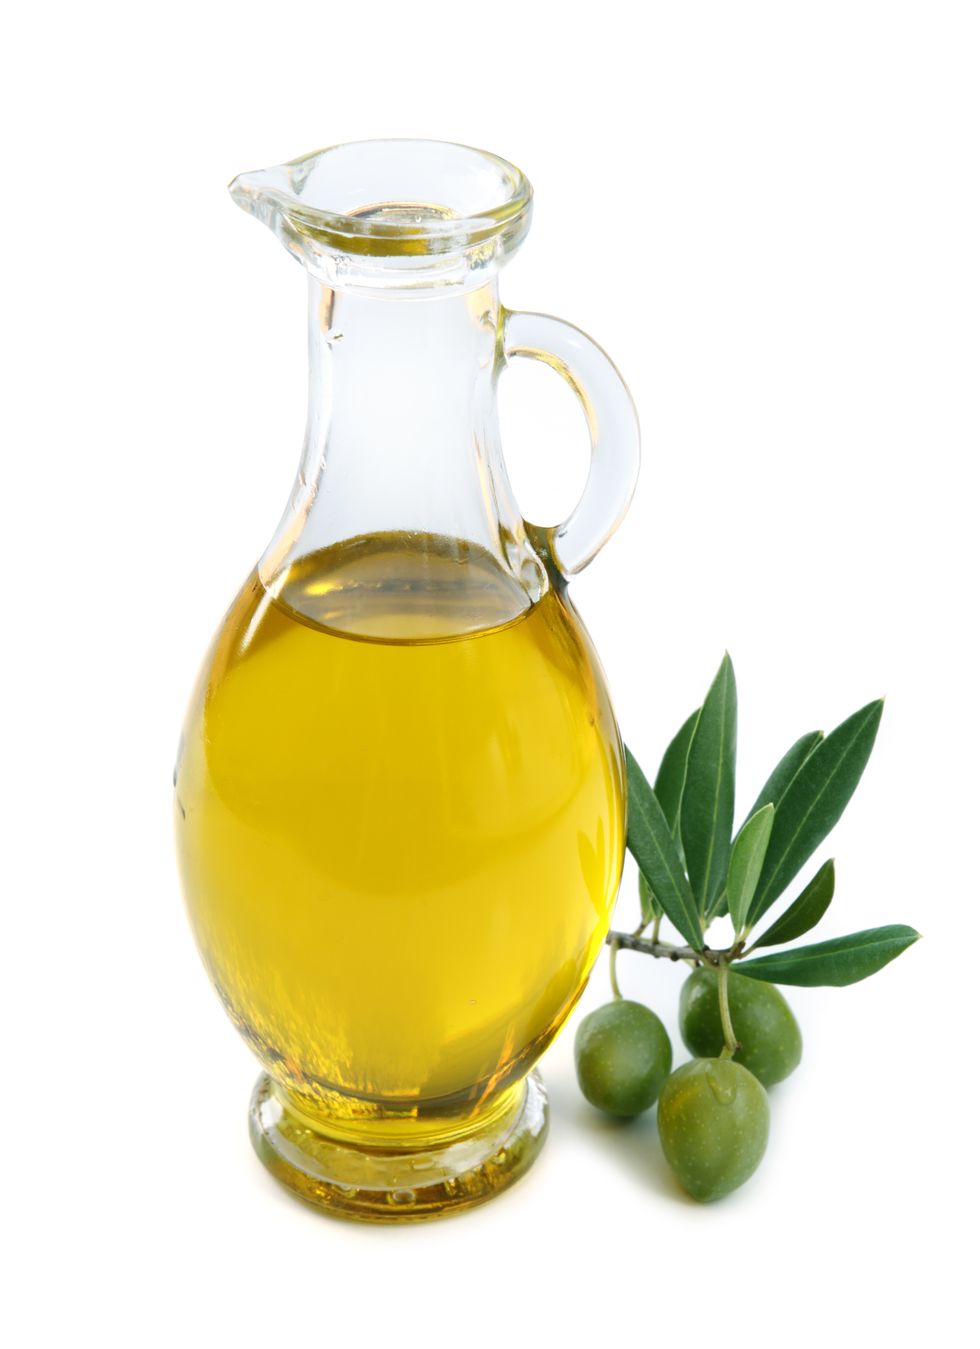 Jug of olive oil with 3 olives by the side